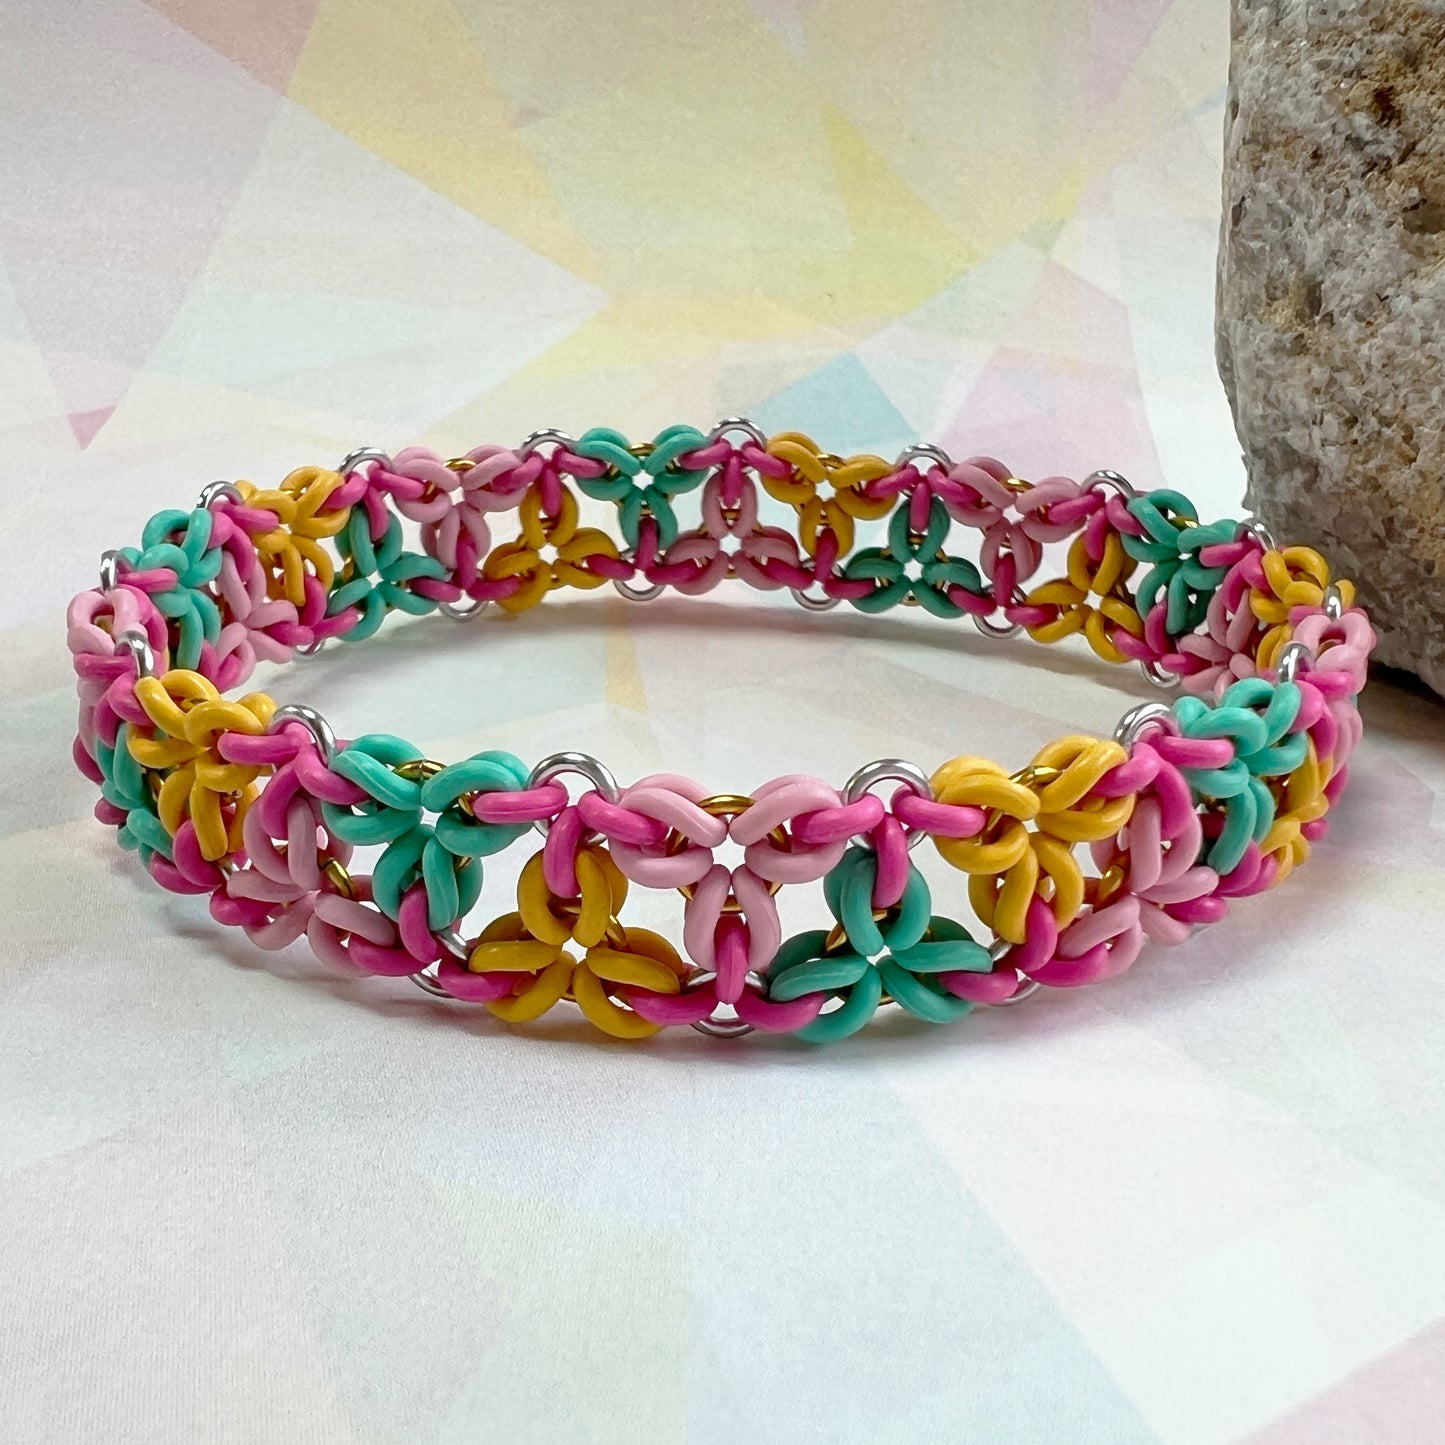 Tri Flower Micro Stretch Bracelet 7.4mm Kit with FREE Video Sorbet Colors fits 7 inch Wrist